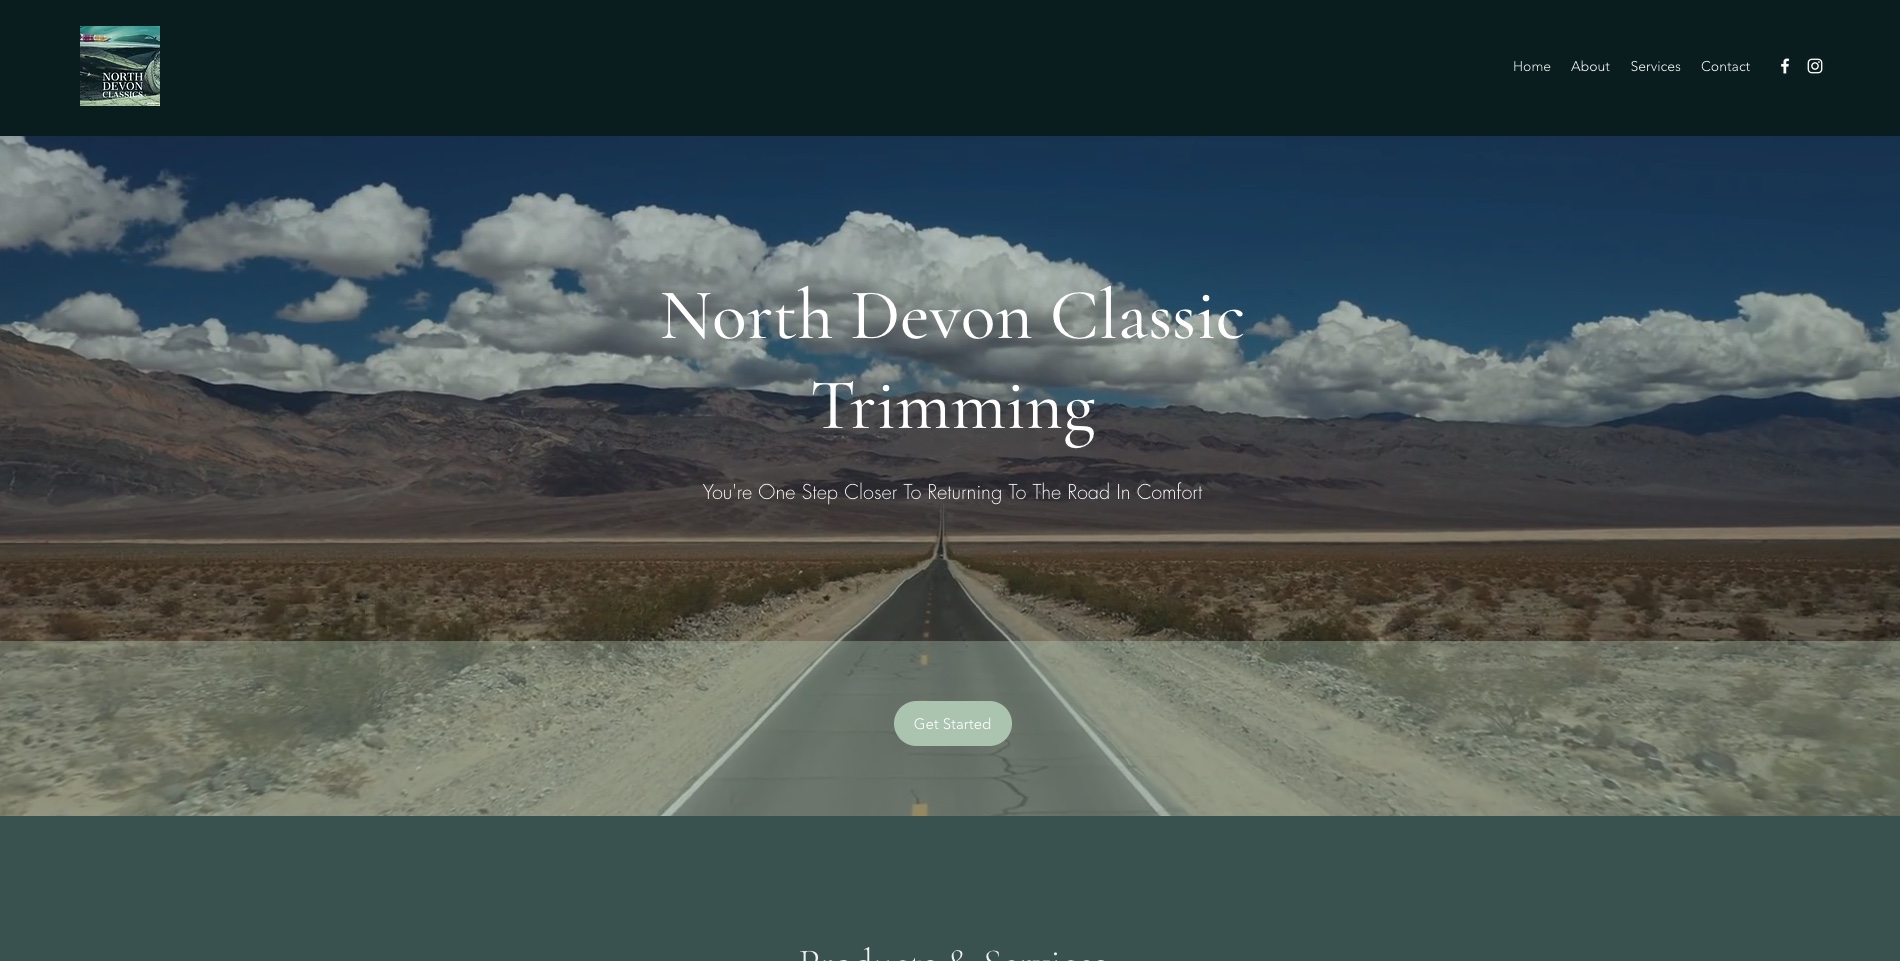 www.northdevonclassictrimming.com